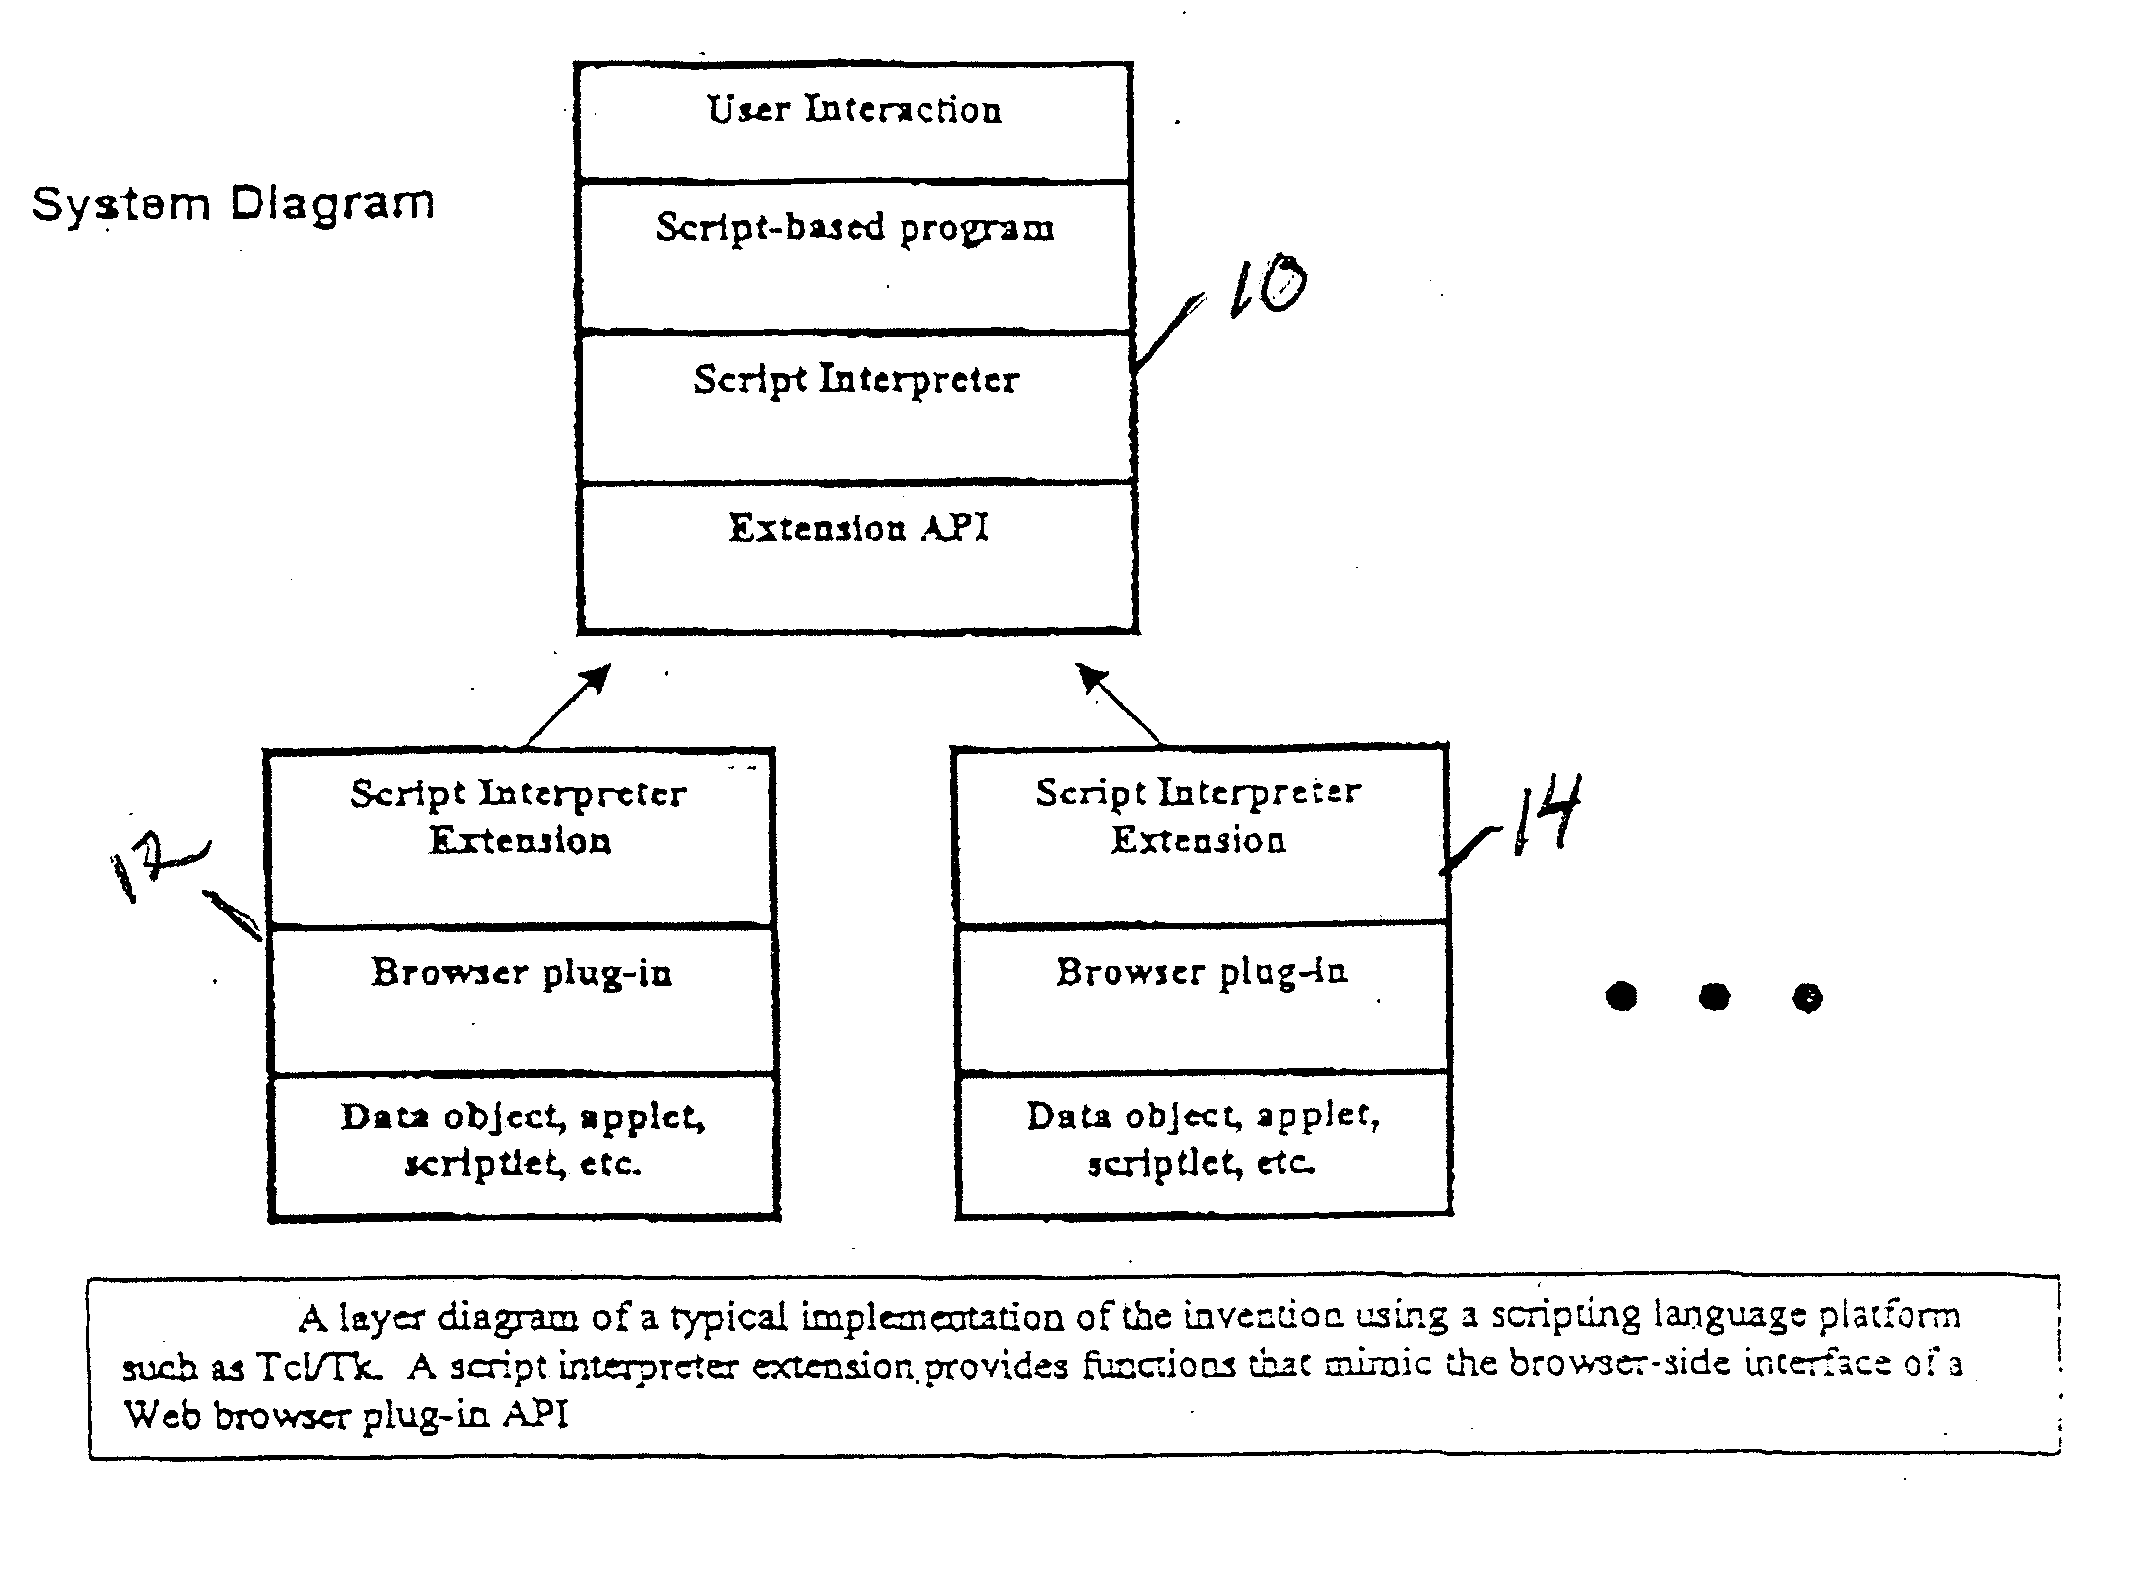 Method and system for hypermedia browser API simulation to enable use of browser plug-ins and applets as embedded widgets in script-language-based interactive programs